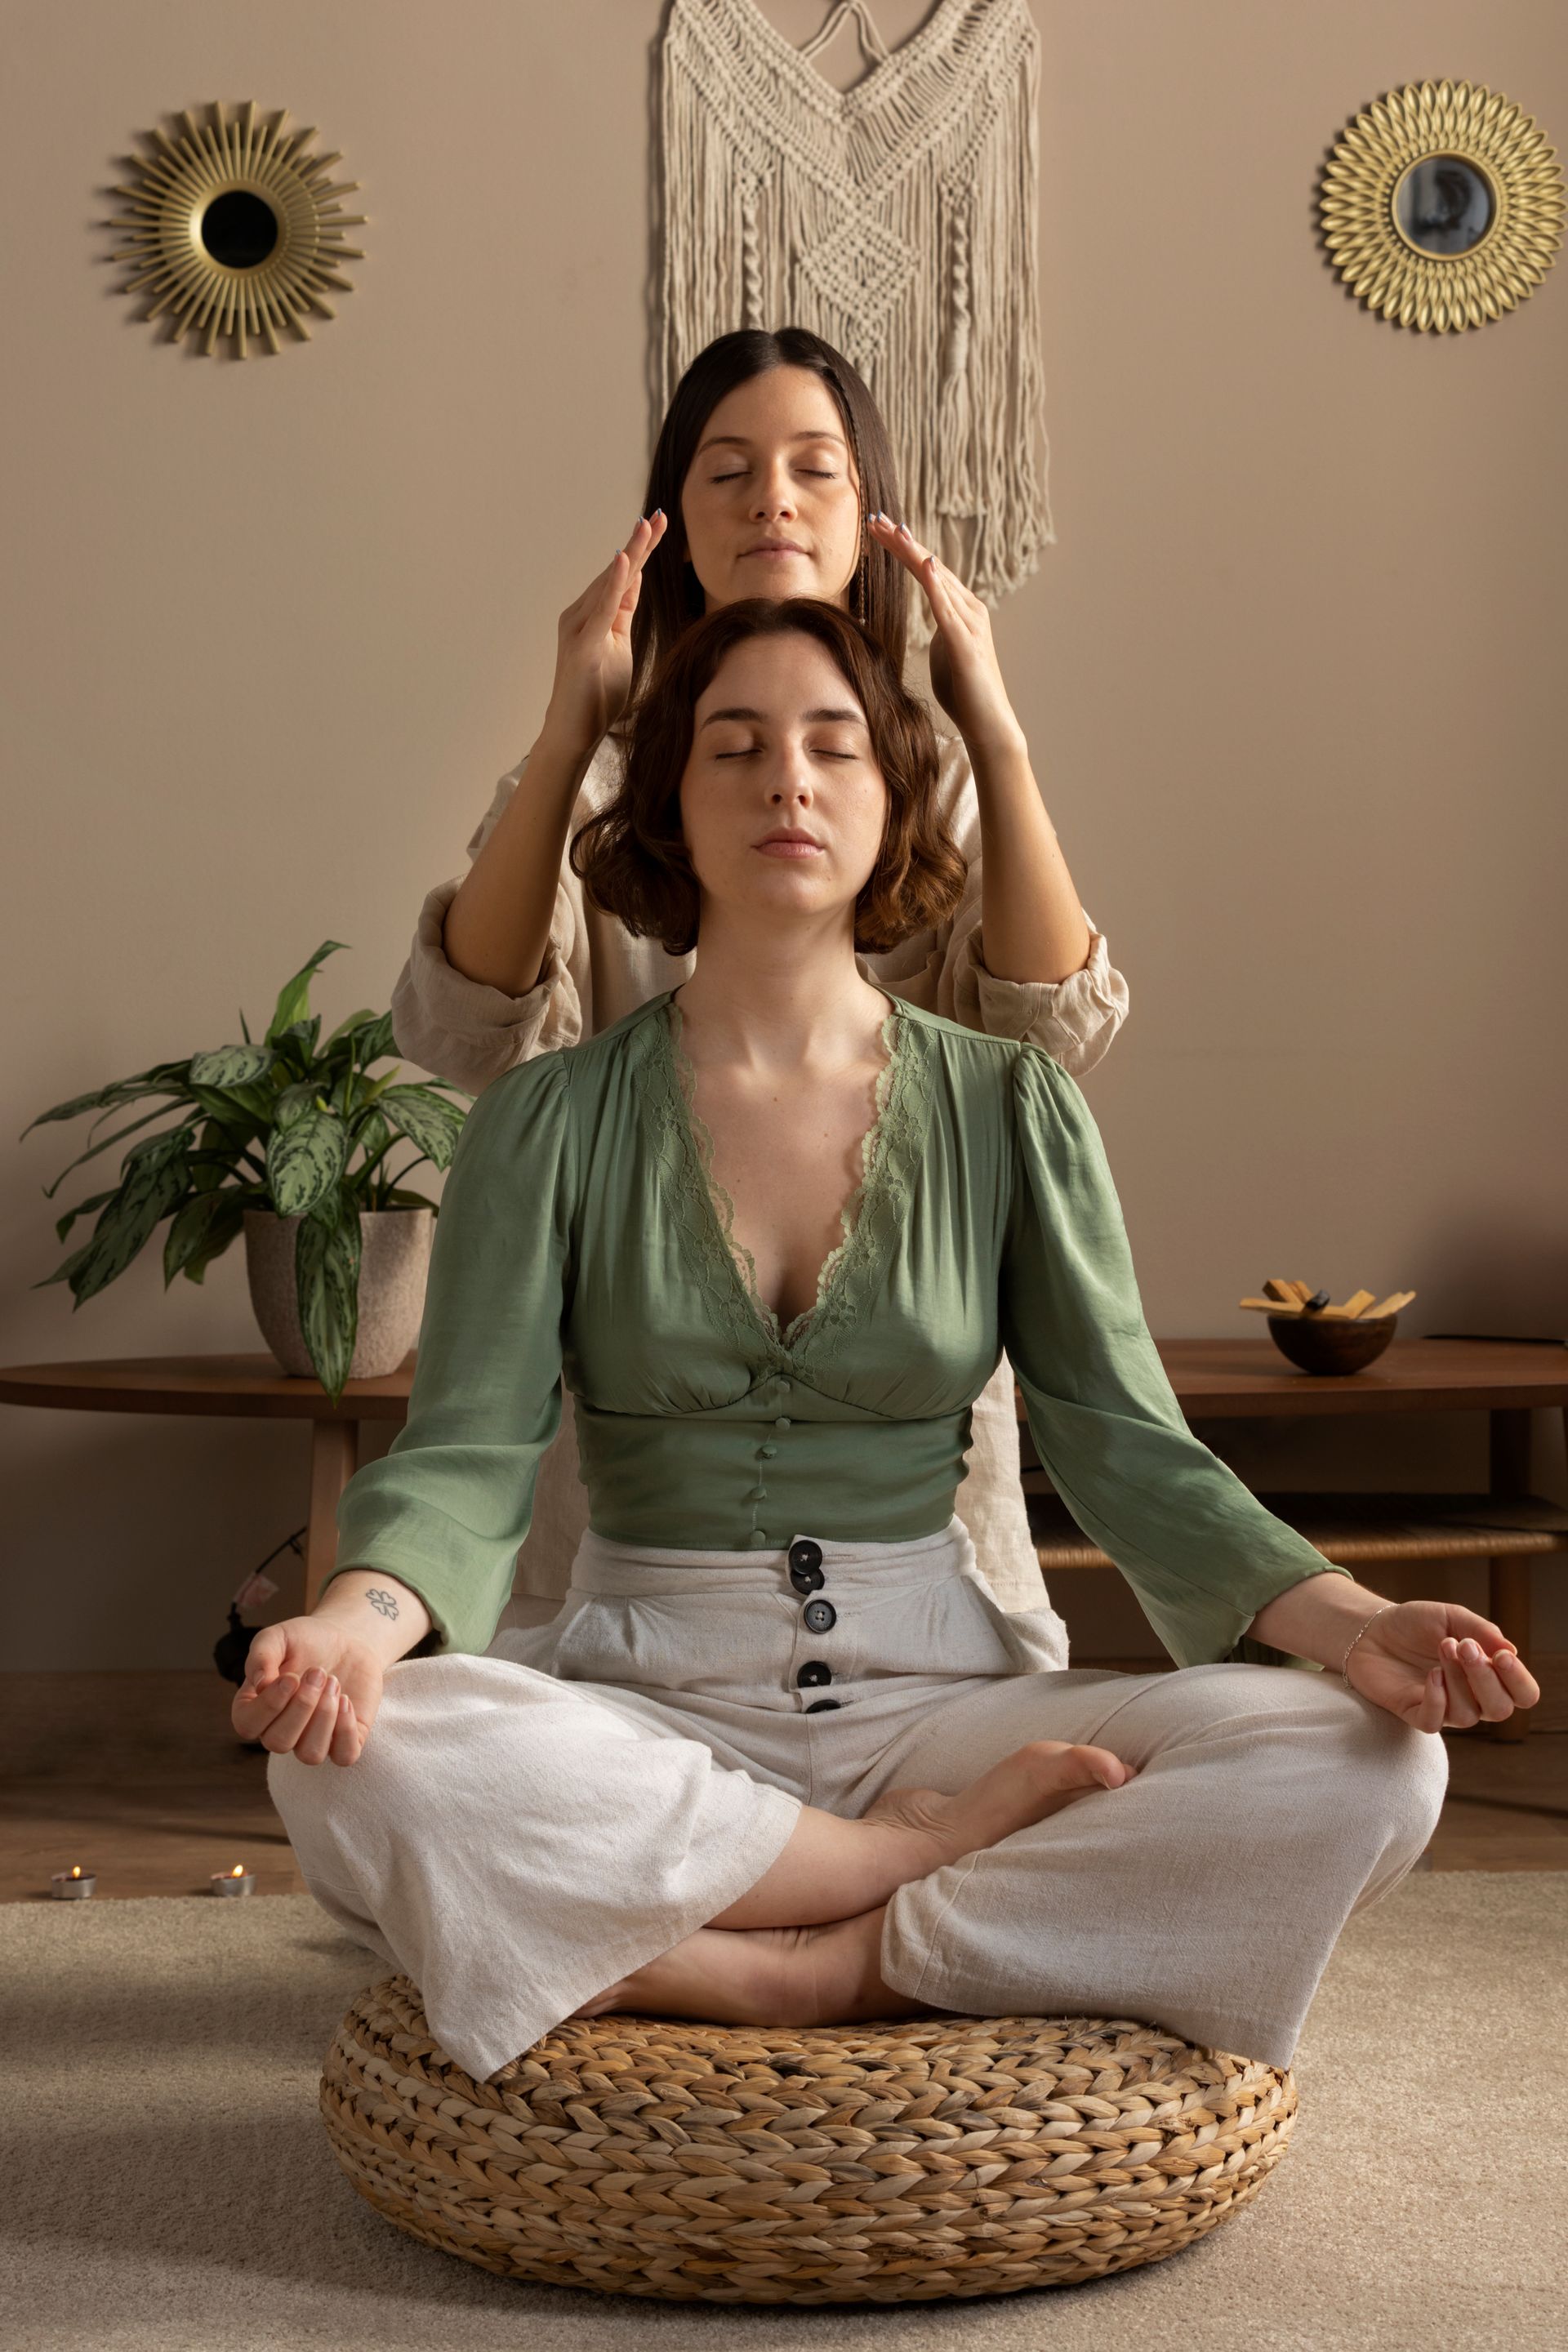 A woman is sitting in a lotus position while another woman massages her head.